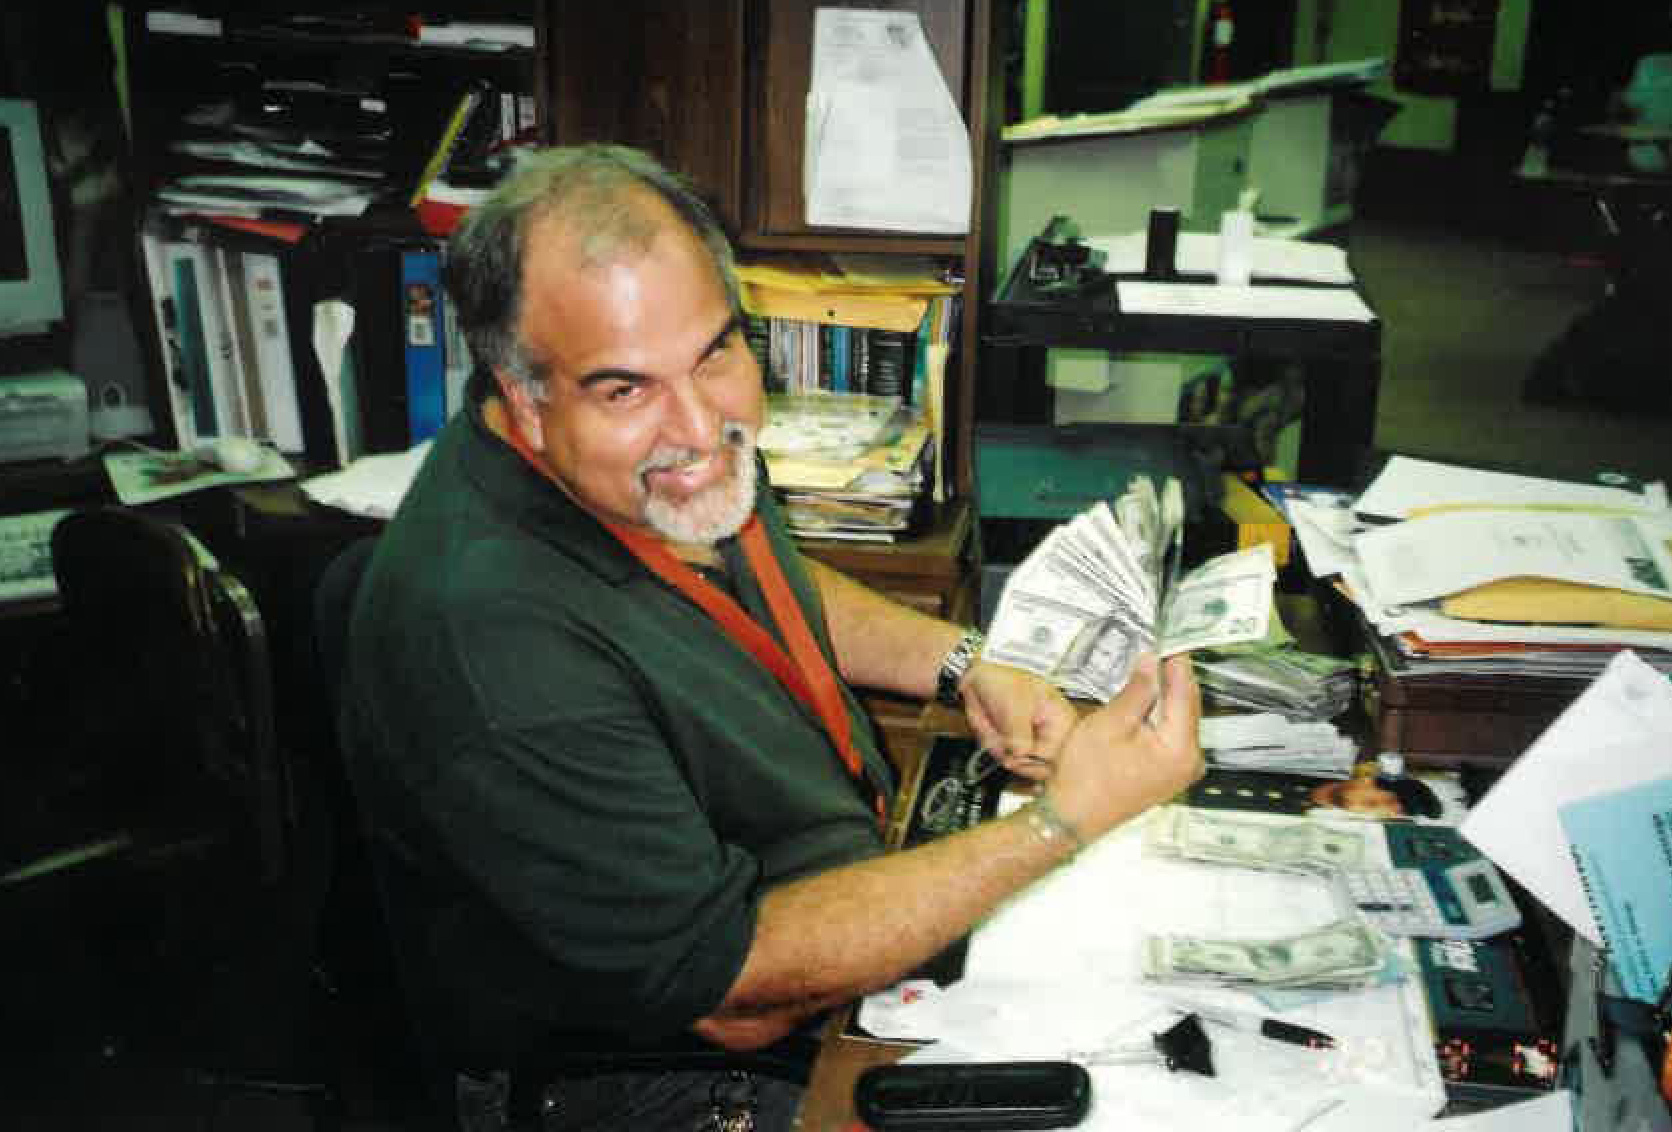 Pete Abatiello has likely counted tens of thousands of dollars in all his years of operating the school store at West Orange.